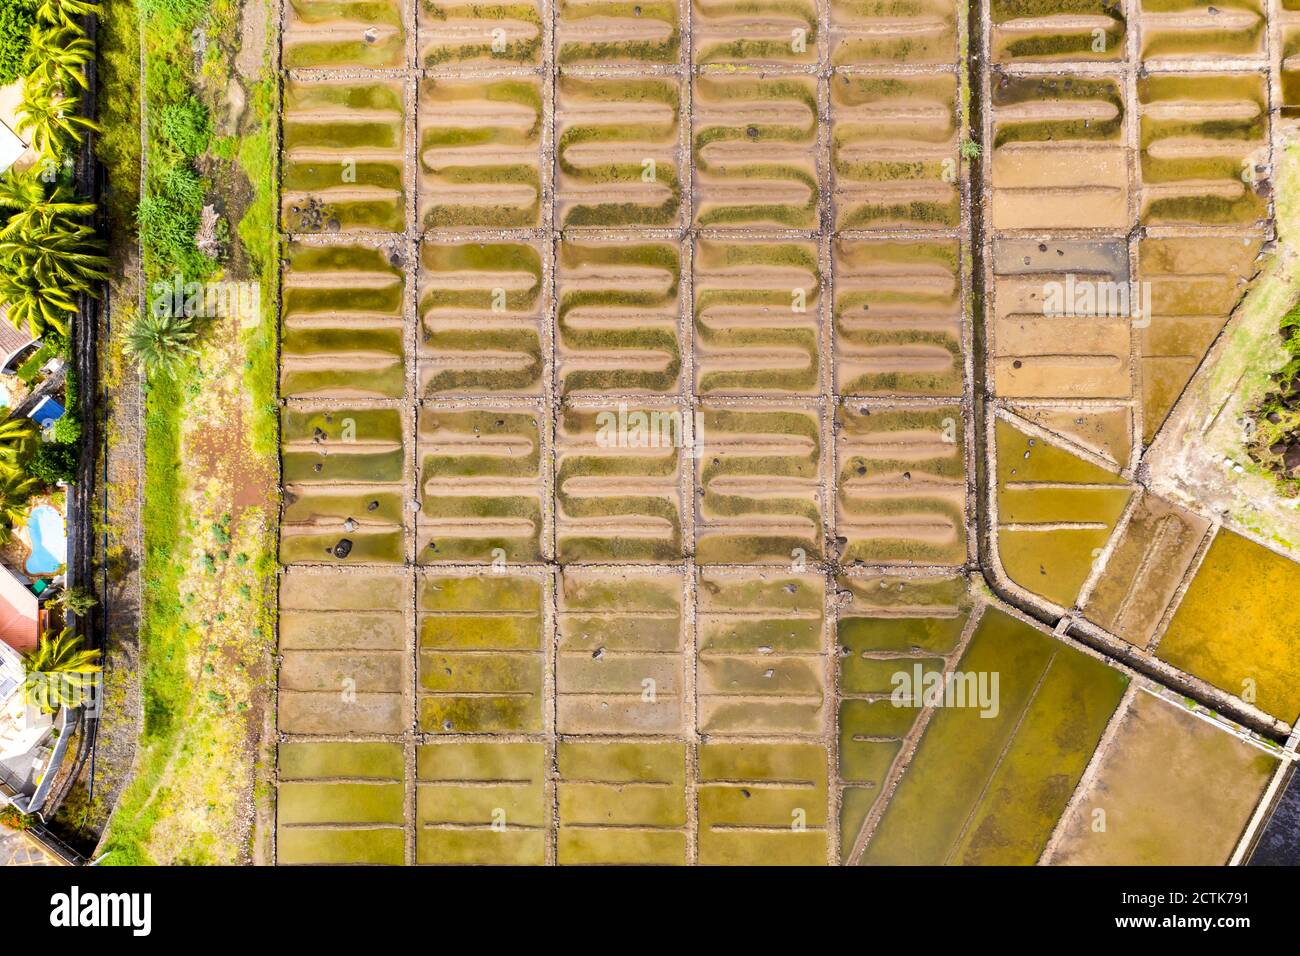 Mauritius, Black River, Tamarin, Helicopter view of rows of salt pans Stock Photo